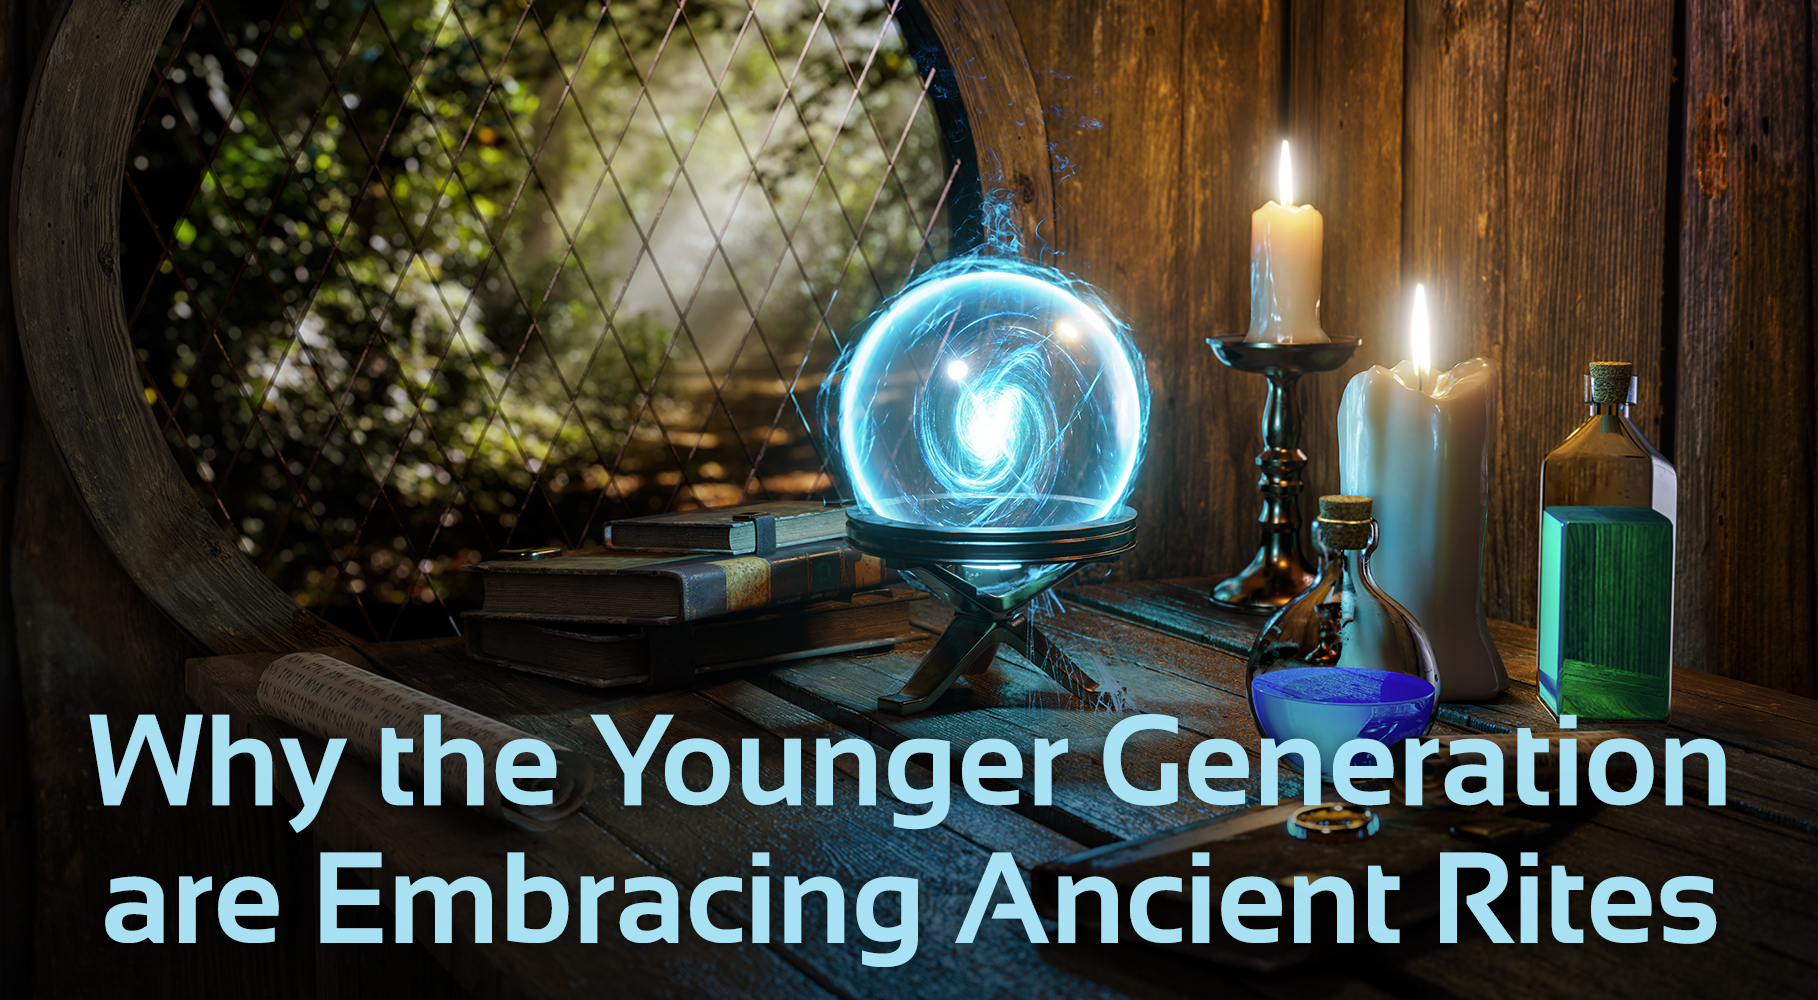 Ancient Rites and the Younger Generation